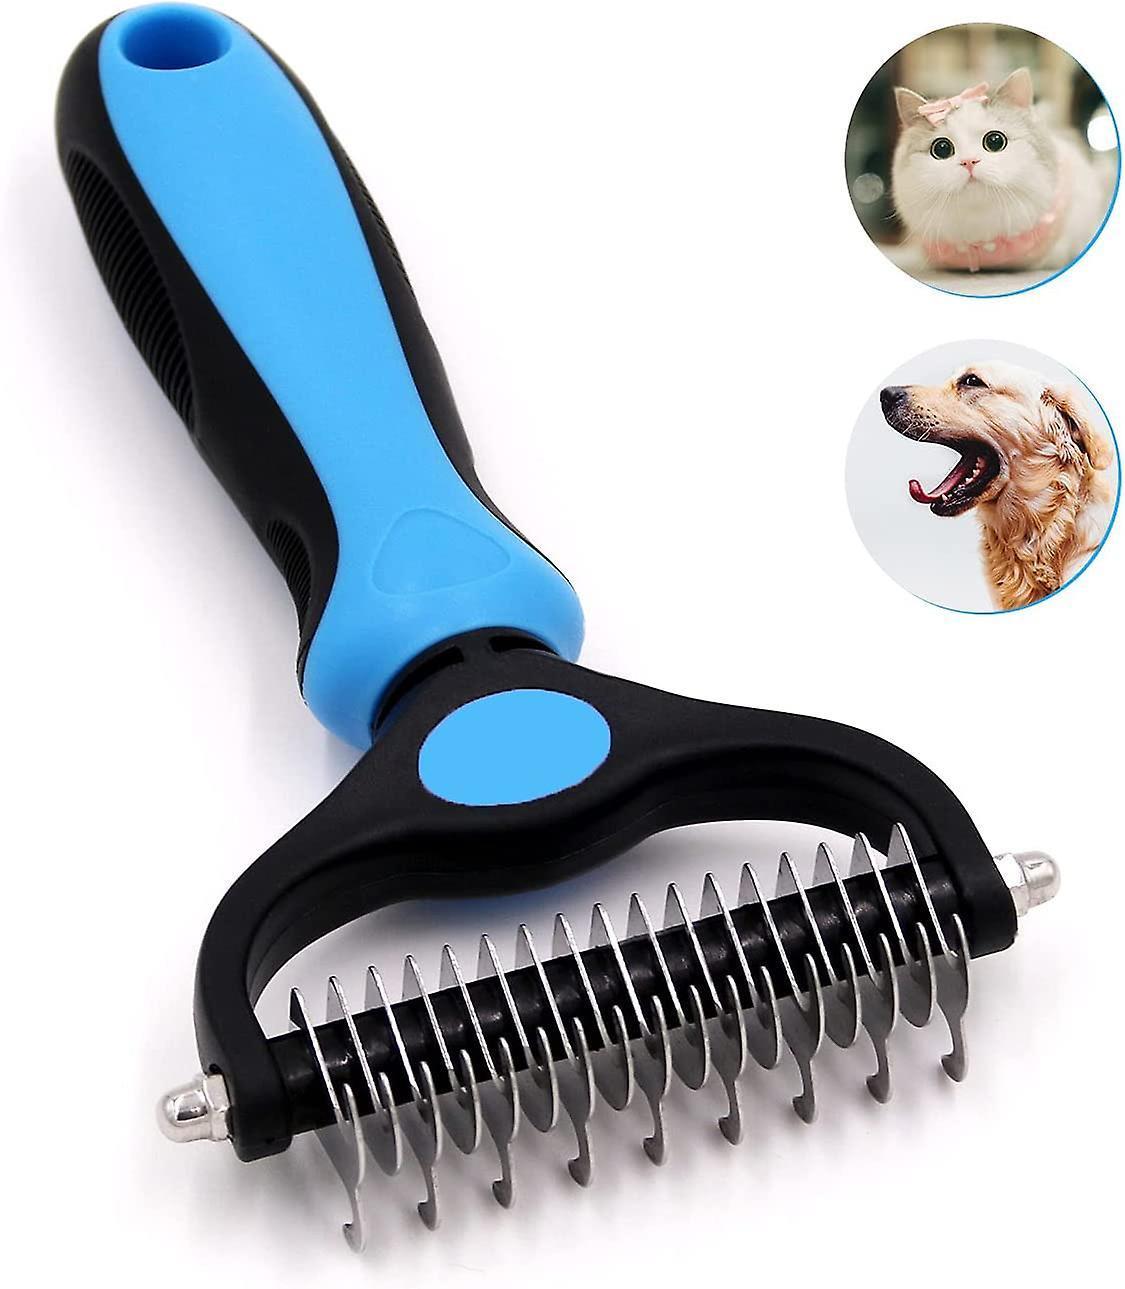 Pet Grooming Tool- 2 Sided Undercoat Rake For Dogs &cats-safe And Effective Dematting Comb For Mats&tangles Removing